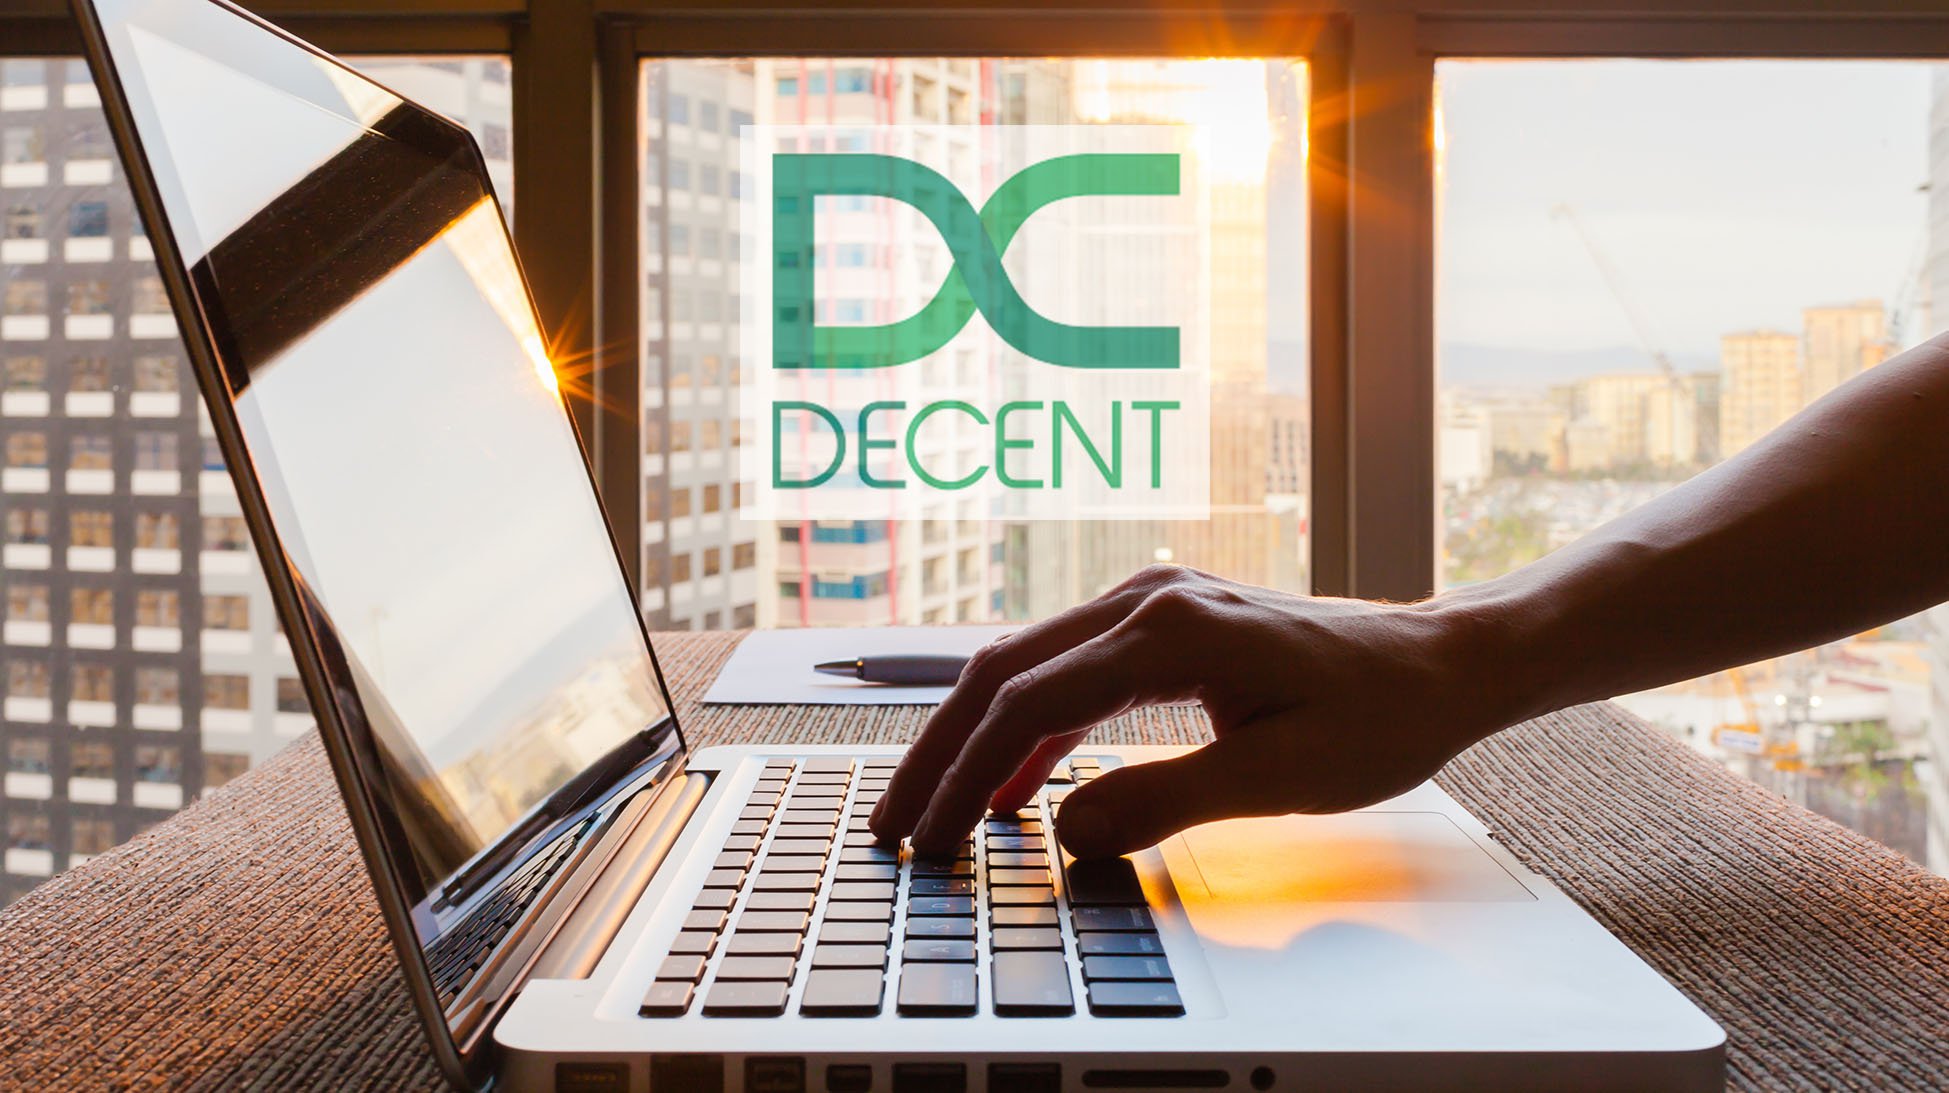 A look at Decent (DCT) crypto and its performance in 2018